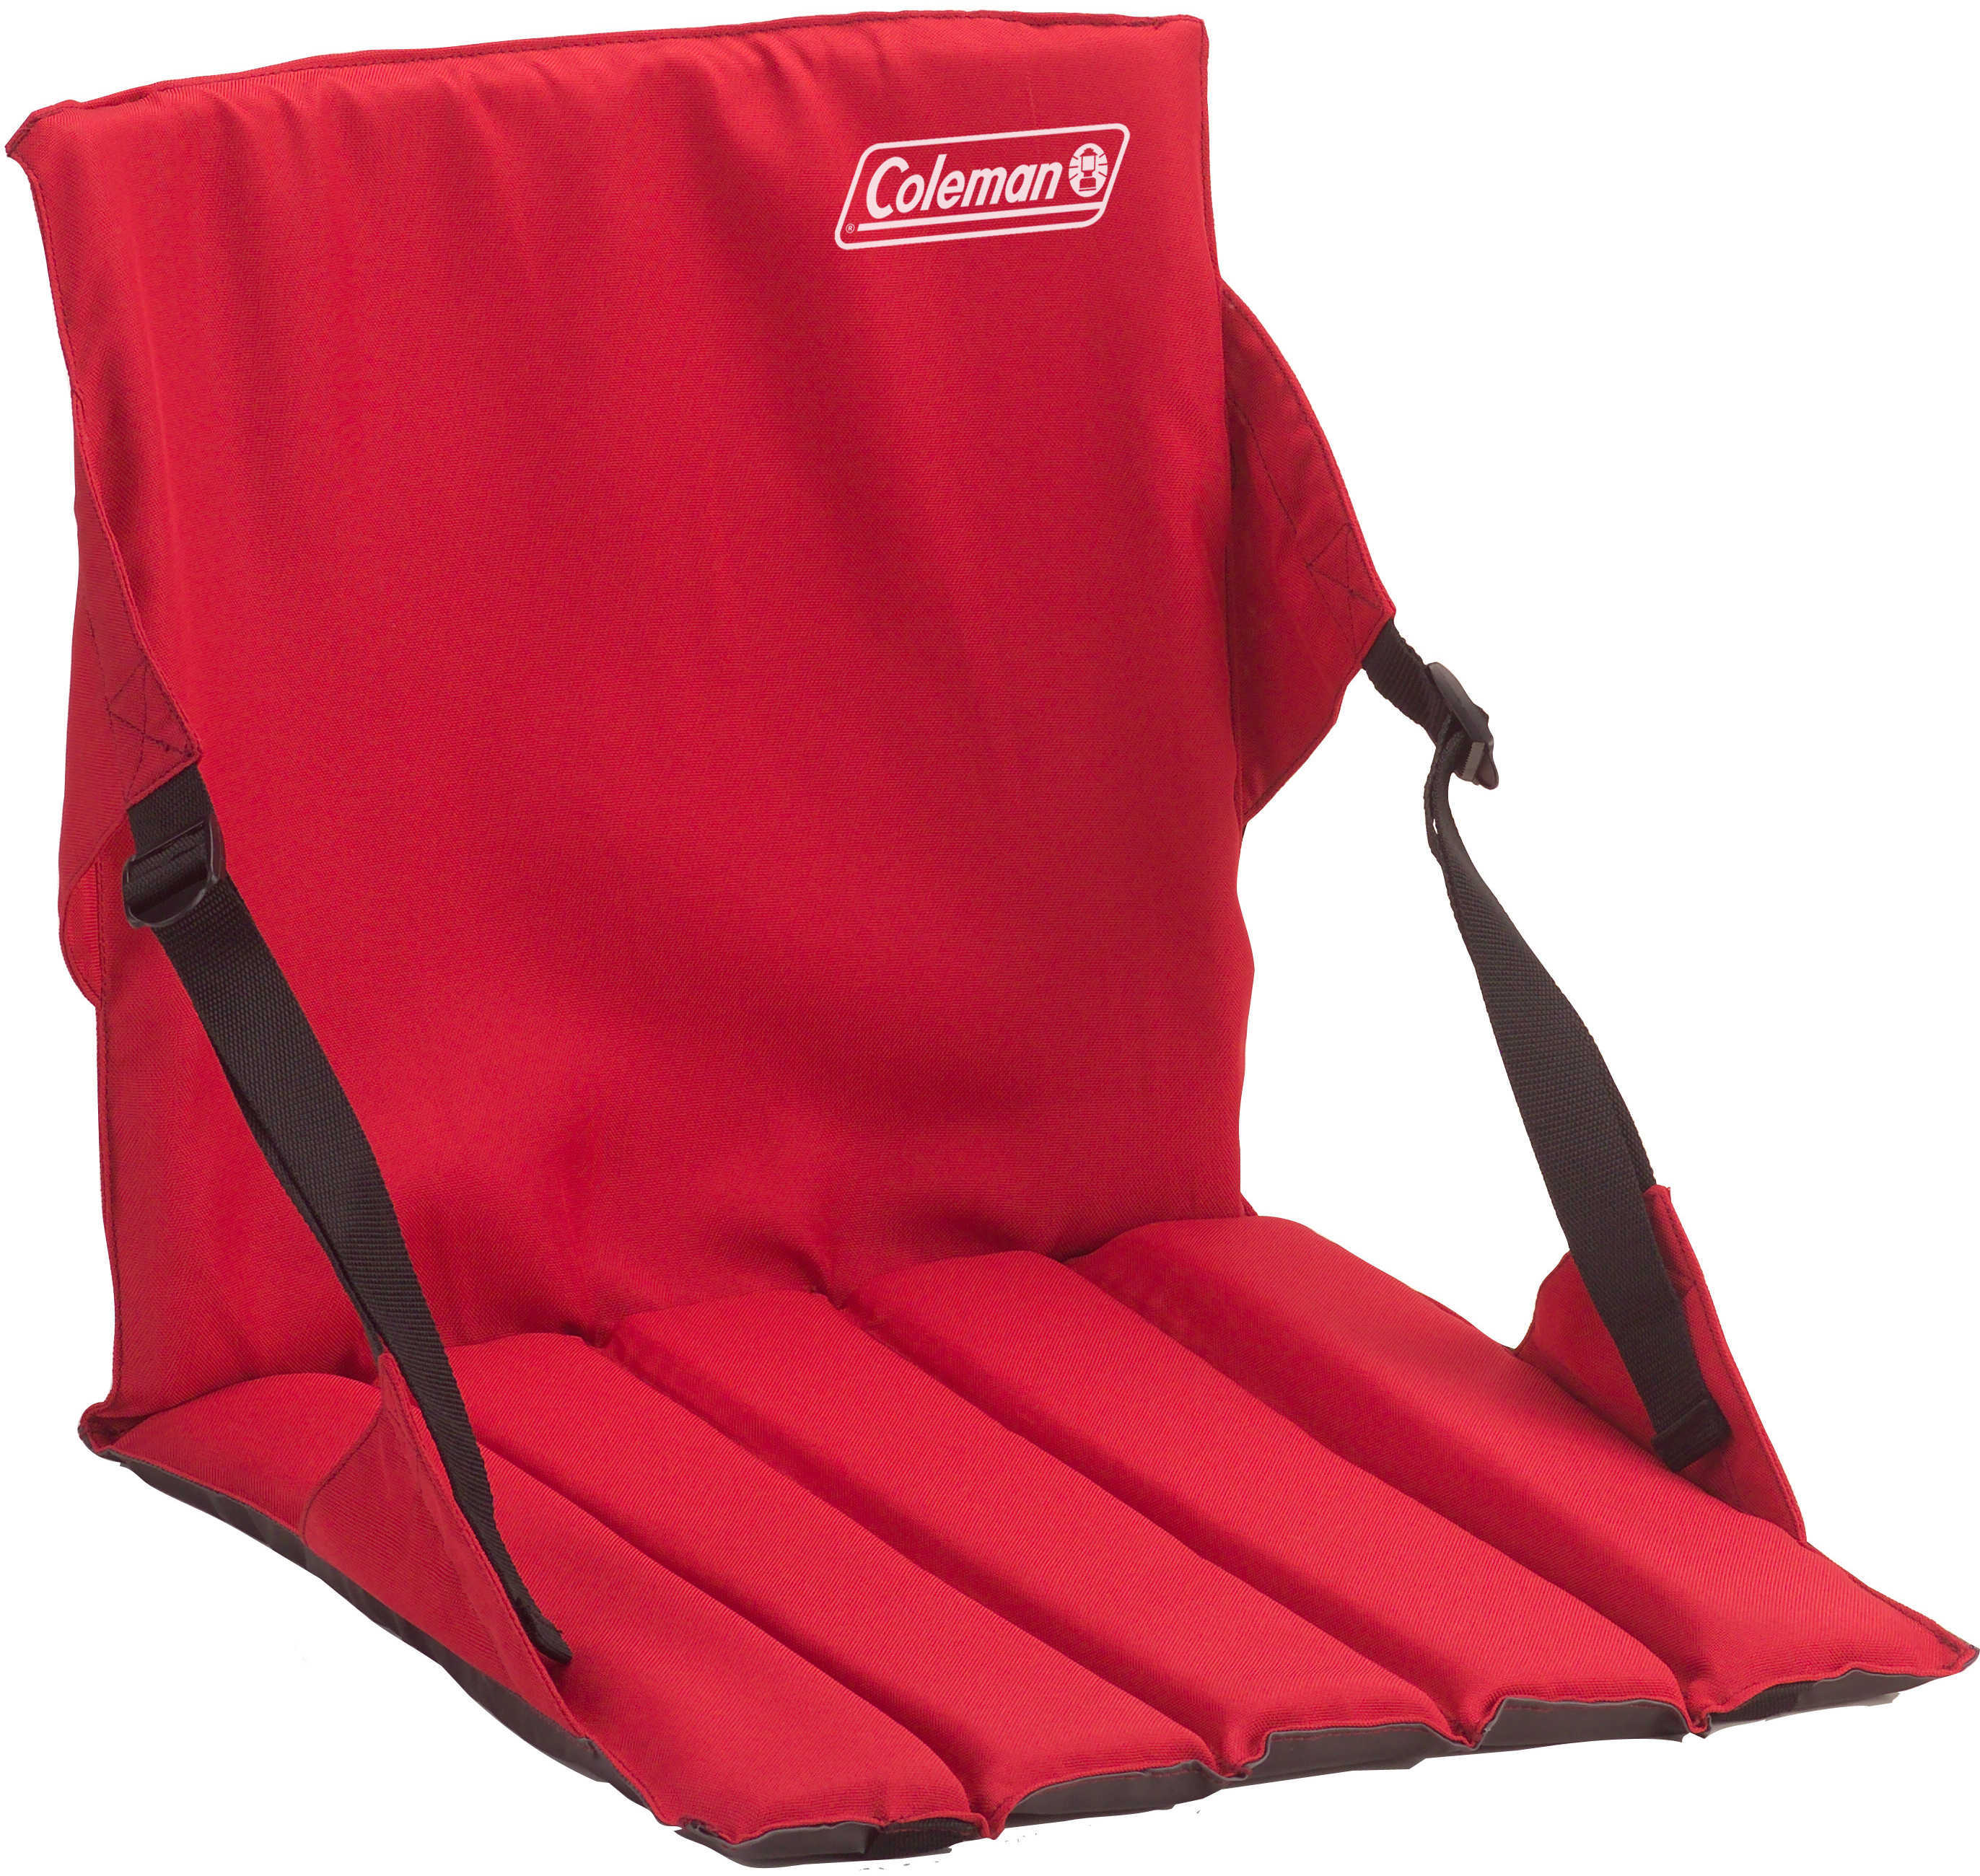 Coleman Chair Stadium Seat, Red Md: 2000004526